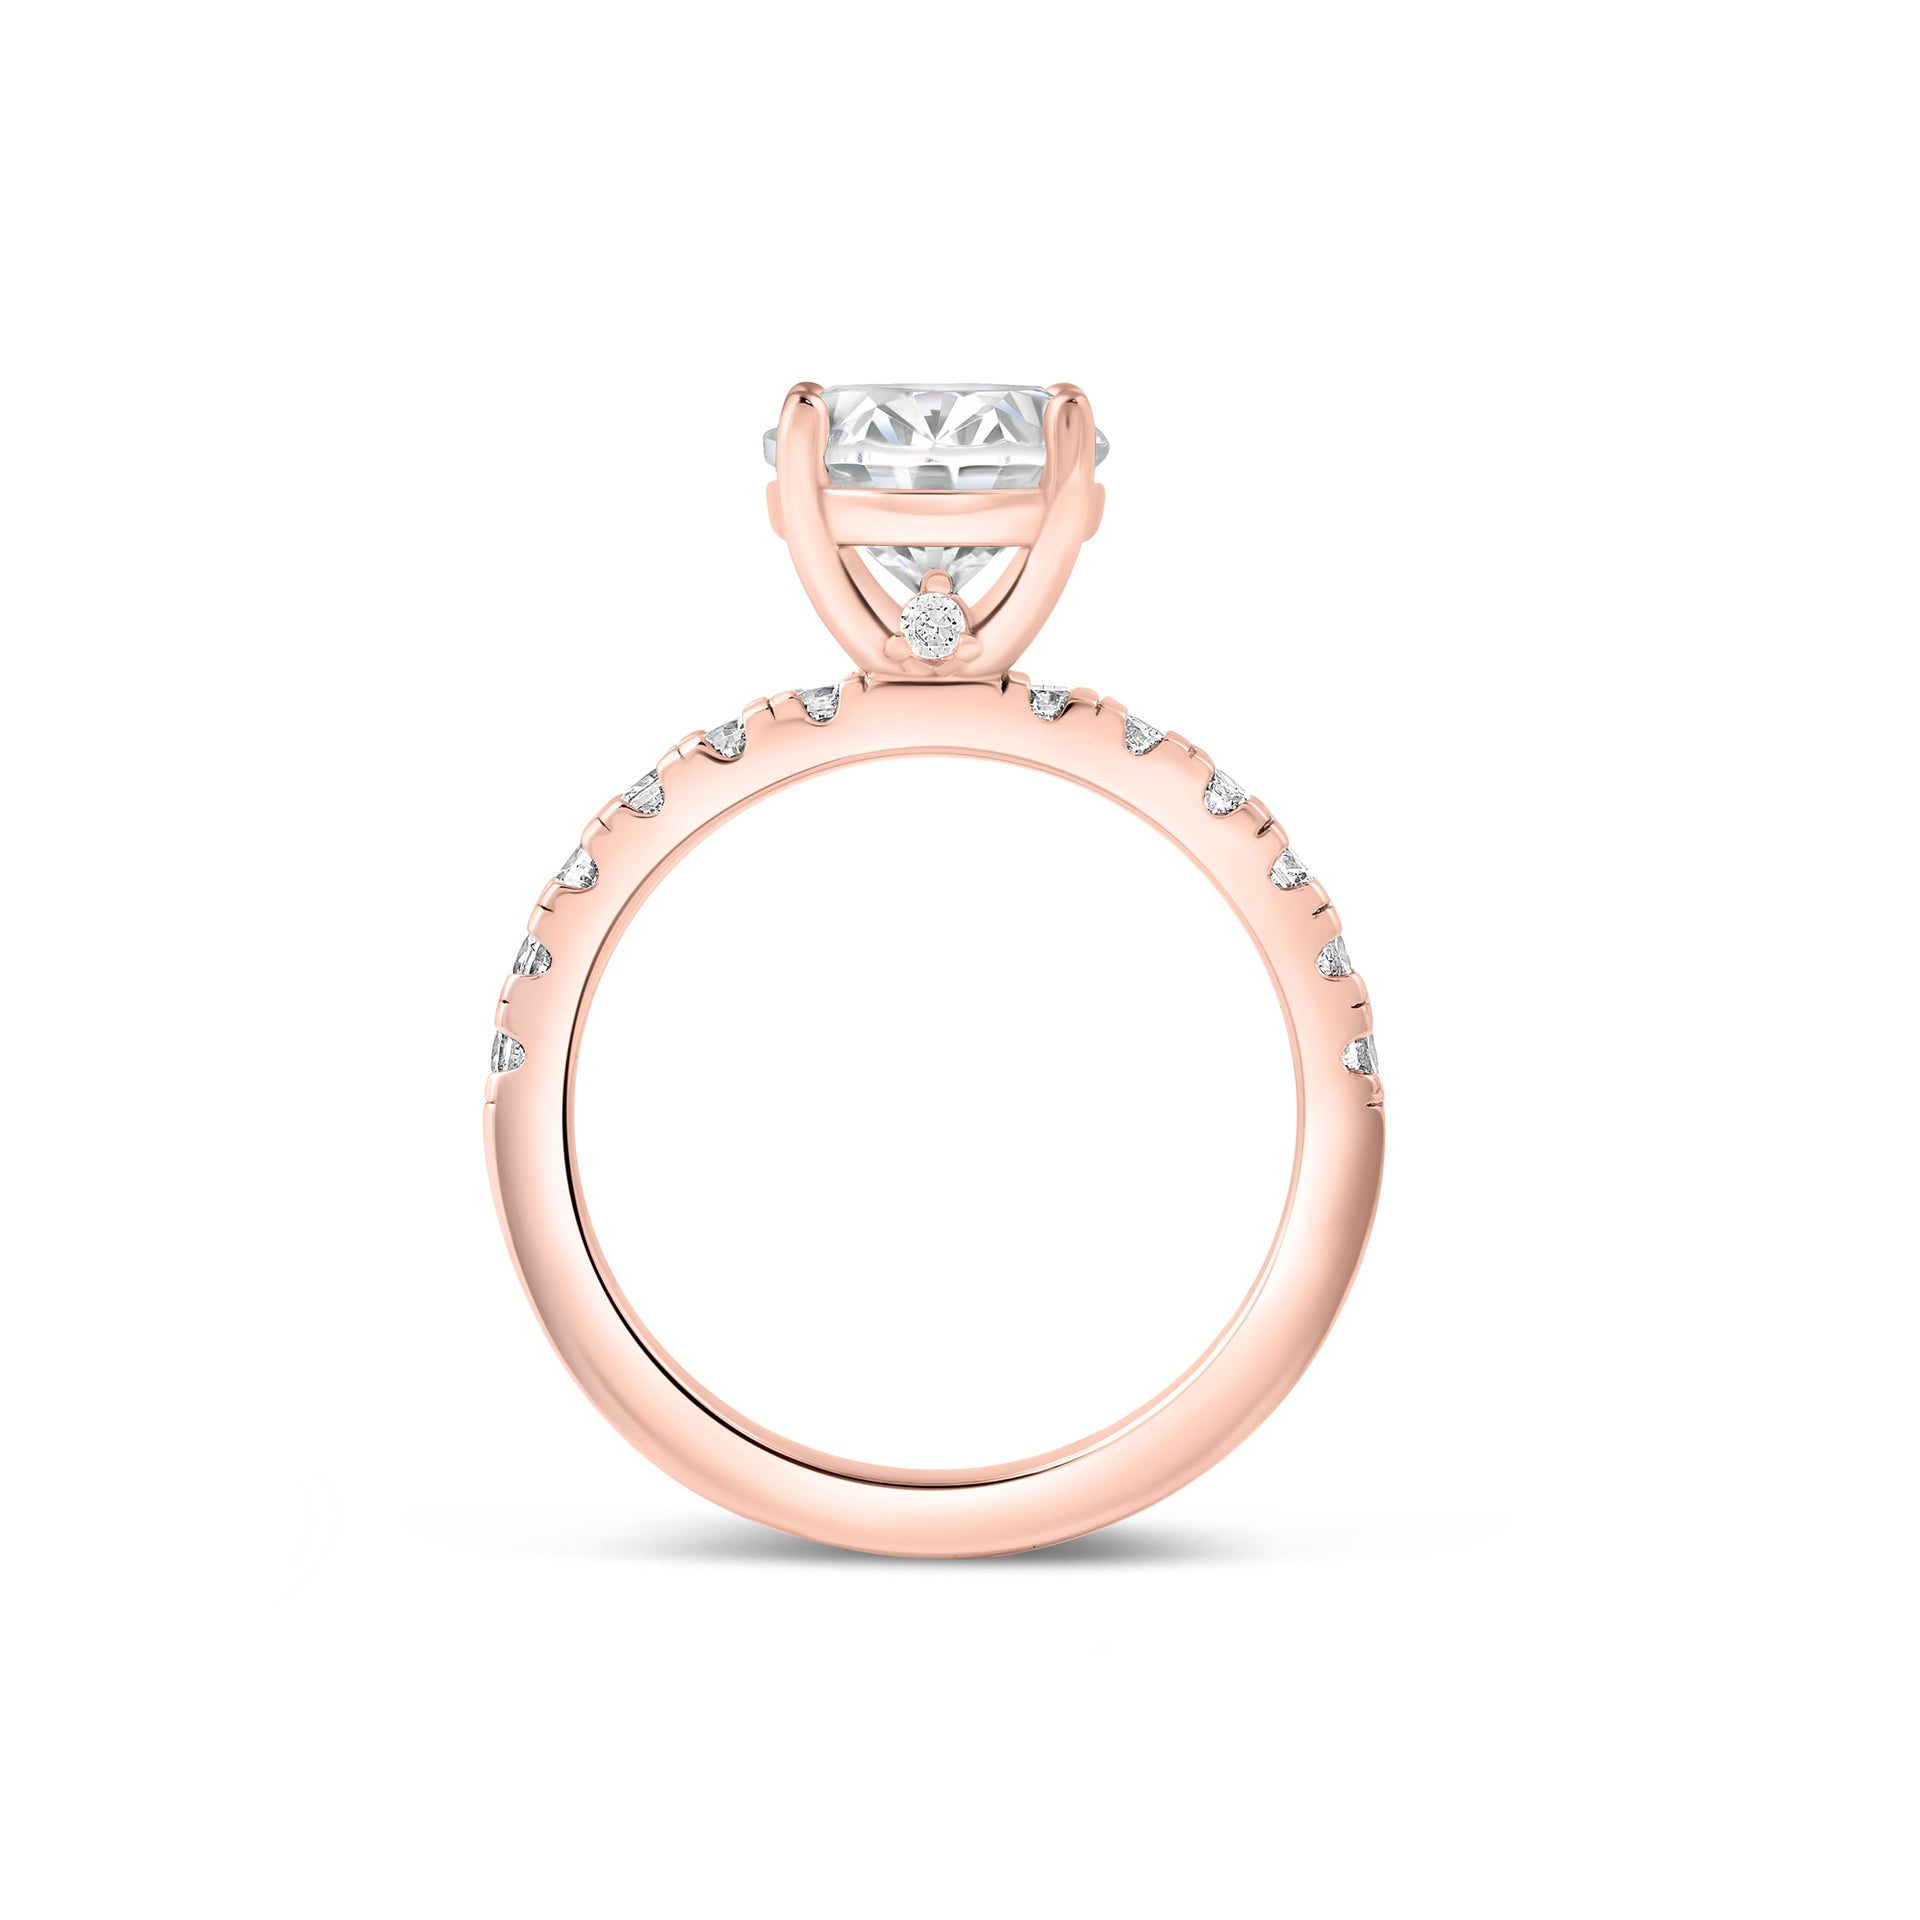 Side view of rose gold 3 carat oval cut engagement ring